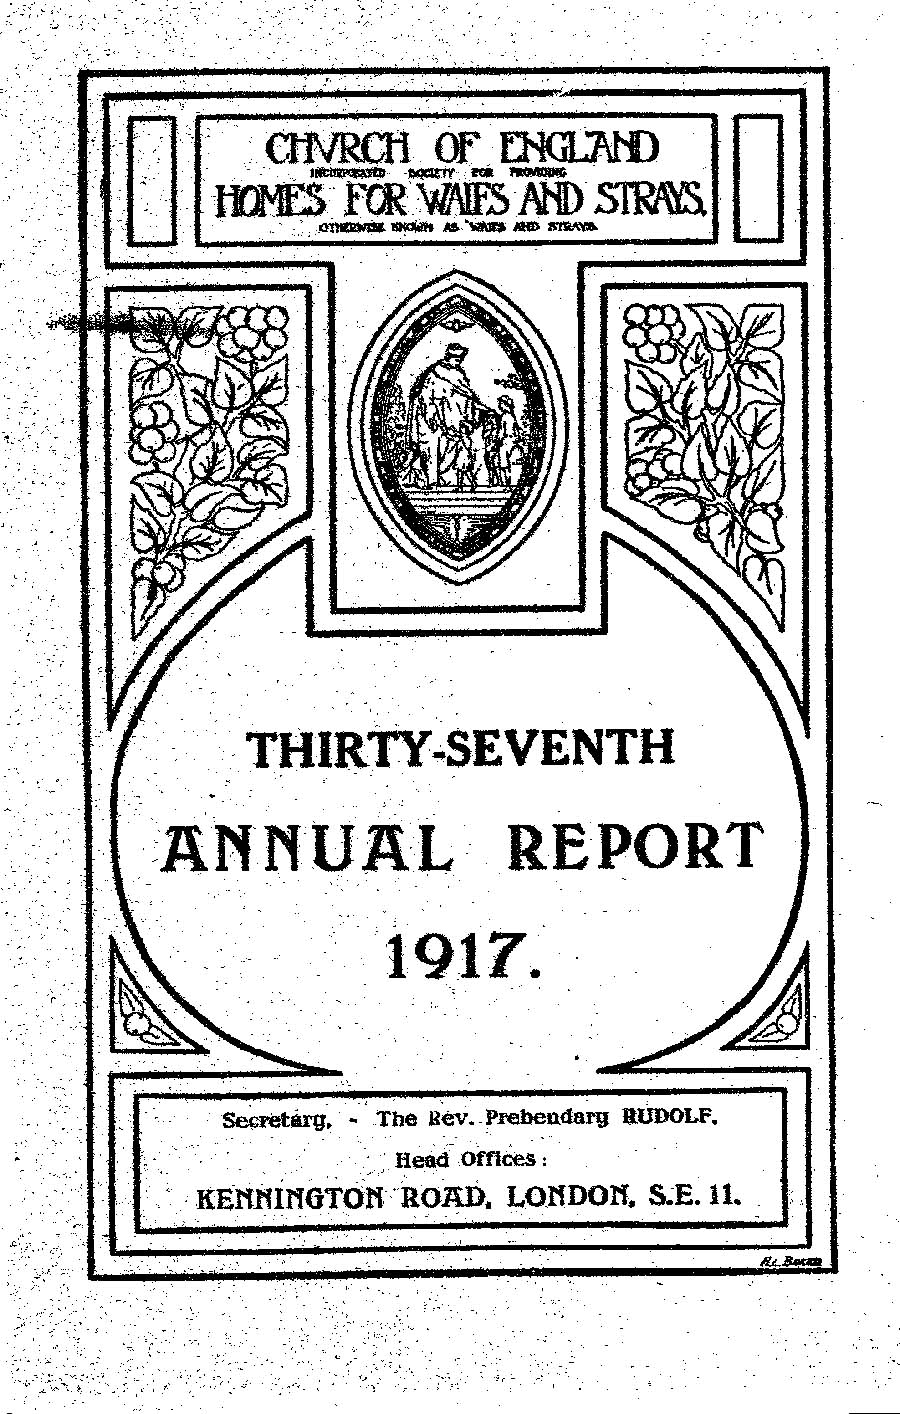 Annual Report 1917 - page 1